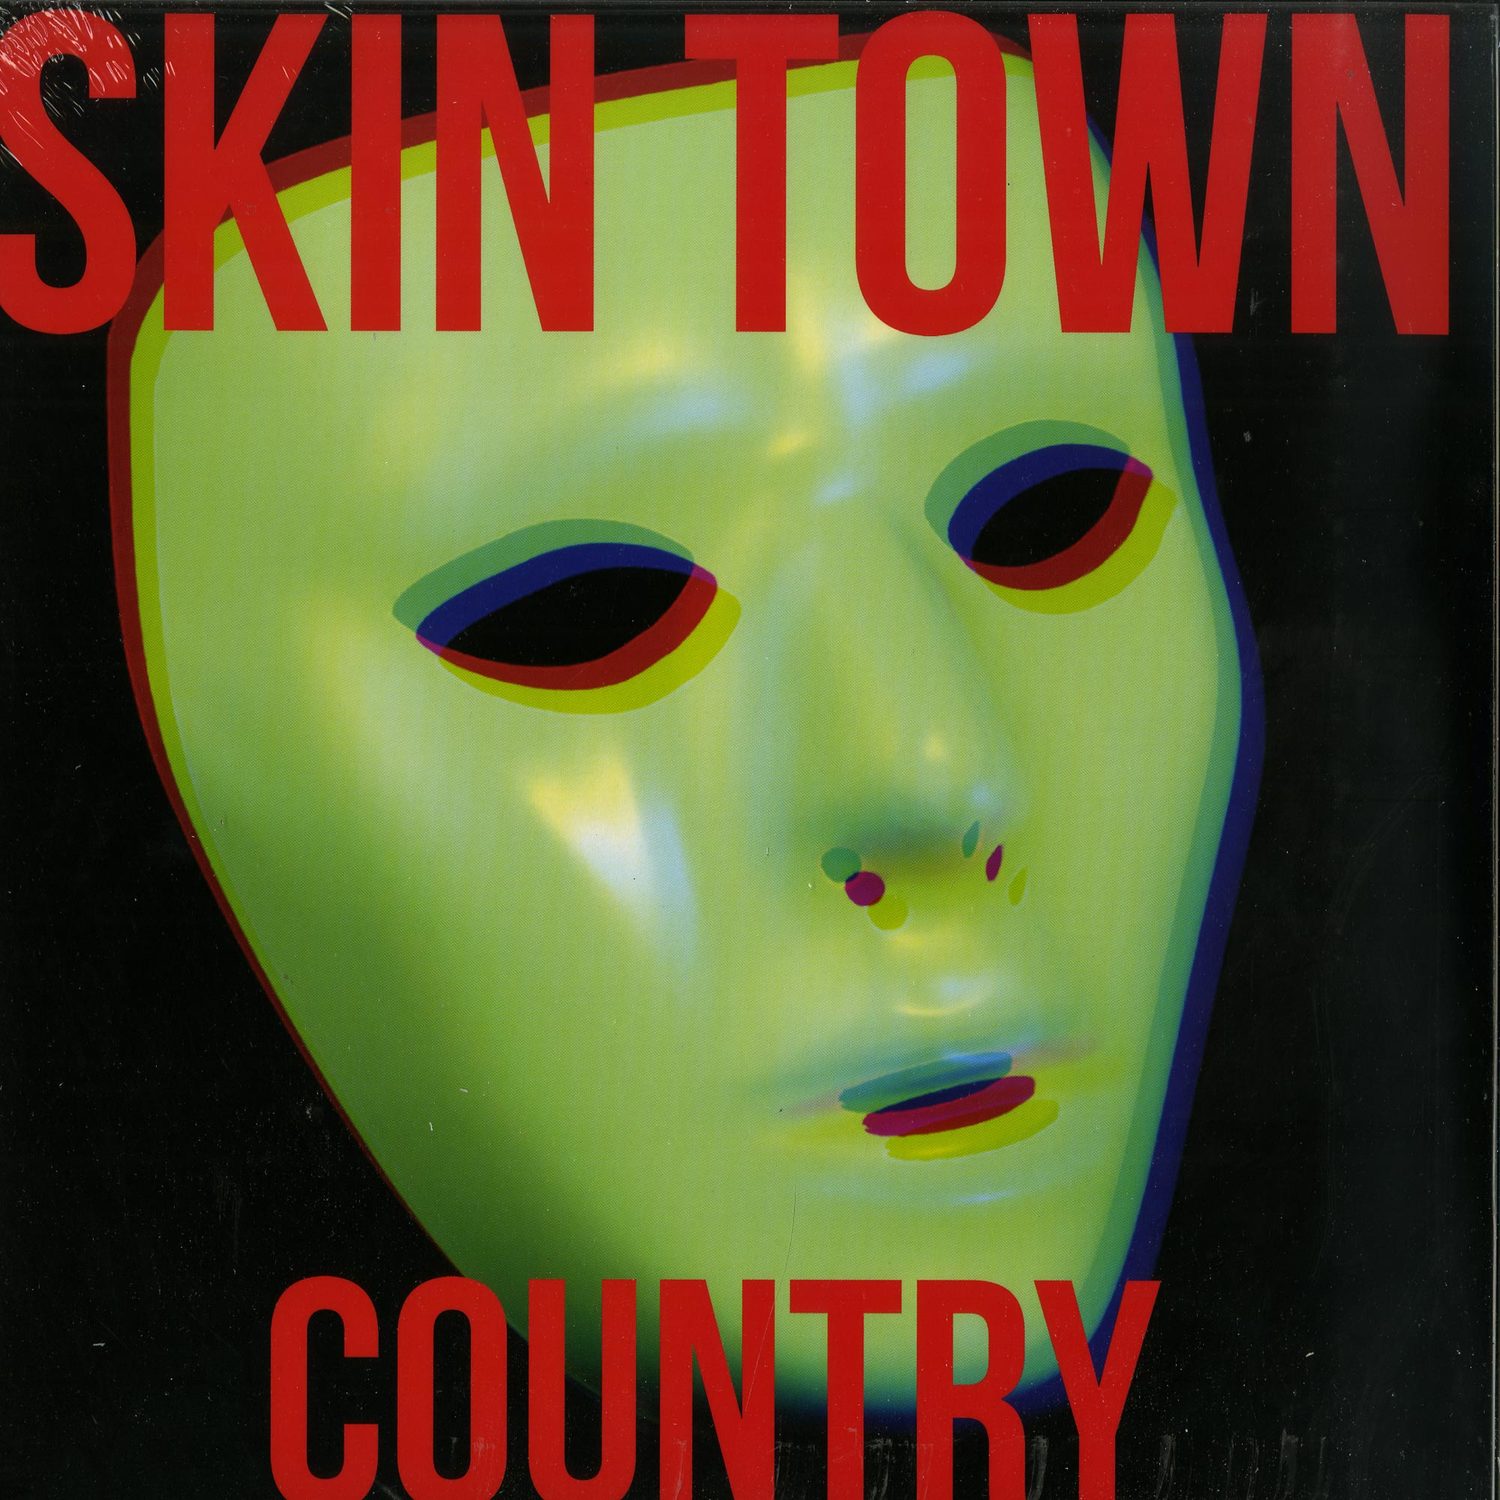 Skin Town - COUNTRY 